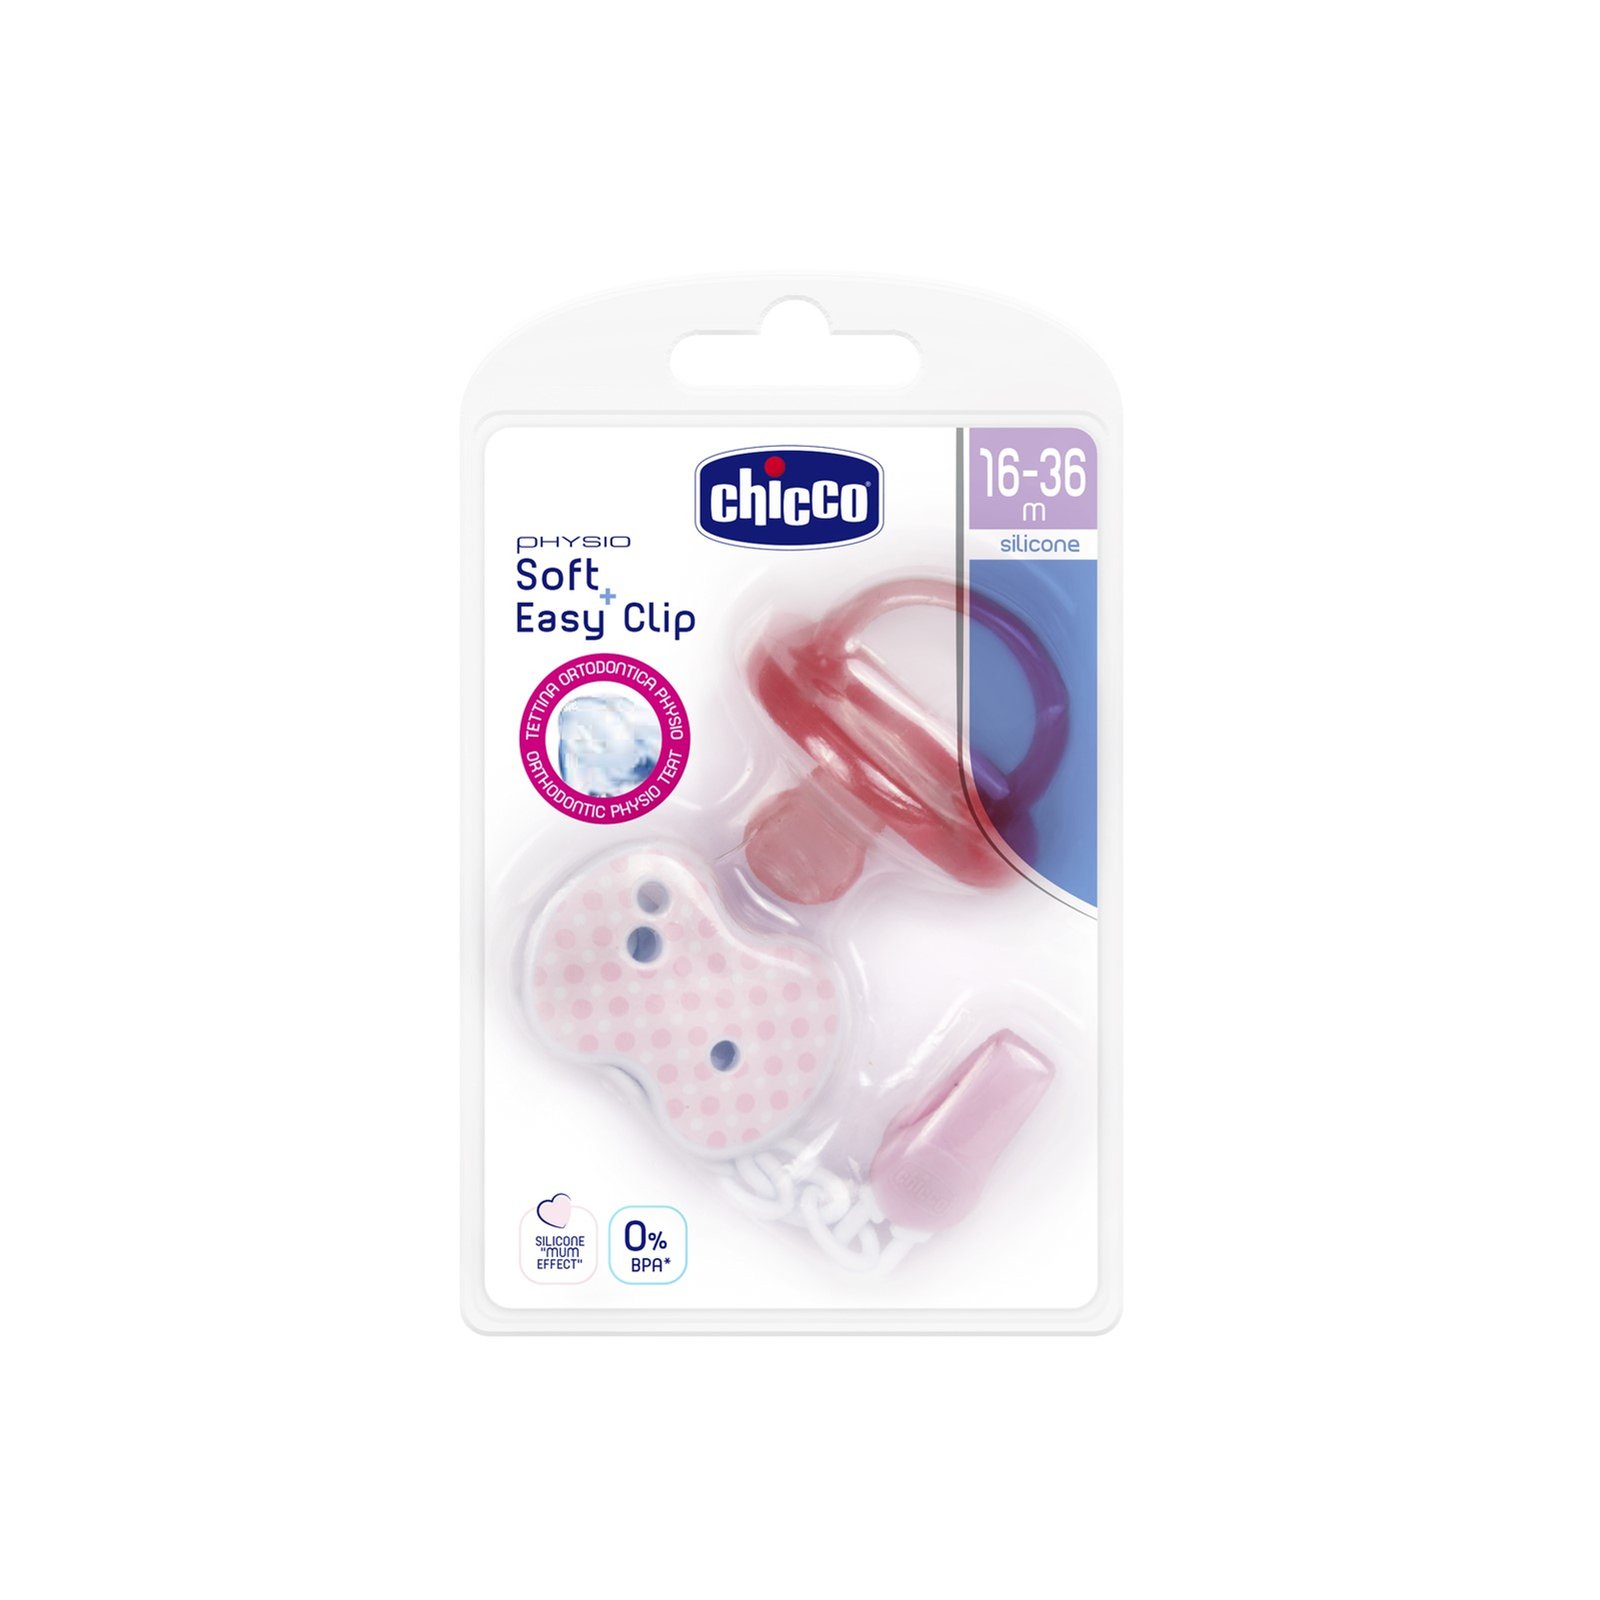 Chicco Physio Soft Silicone Pacifier + Easy Clip 16-36m Pink